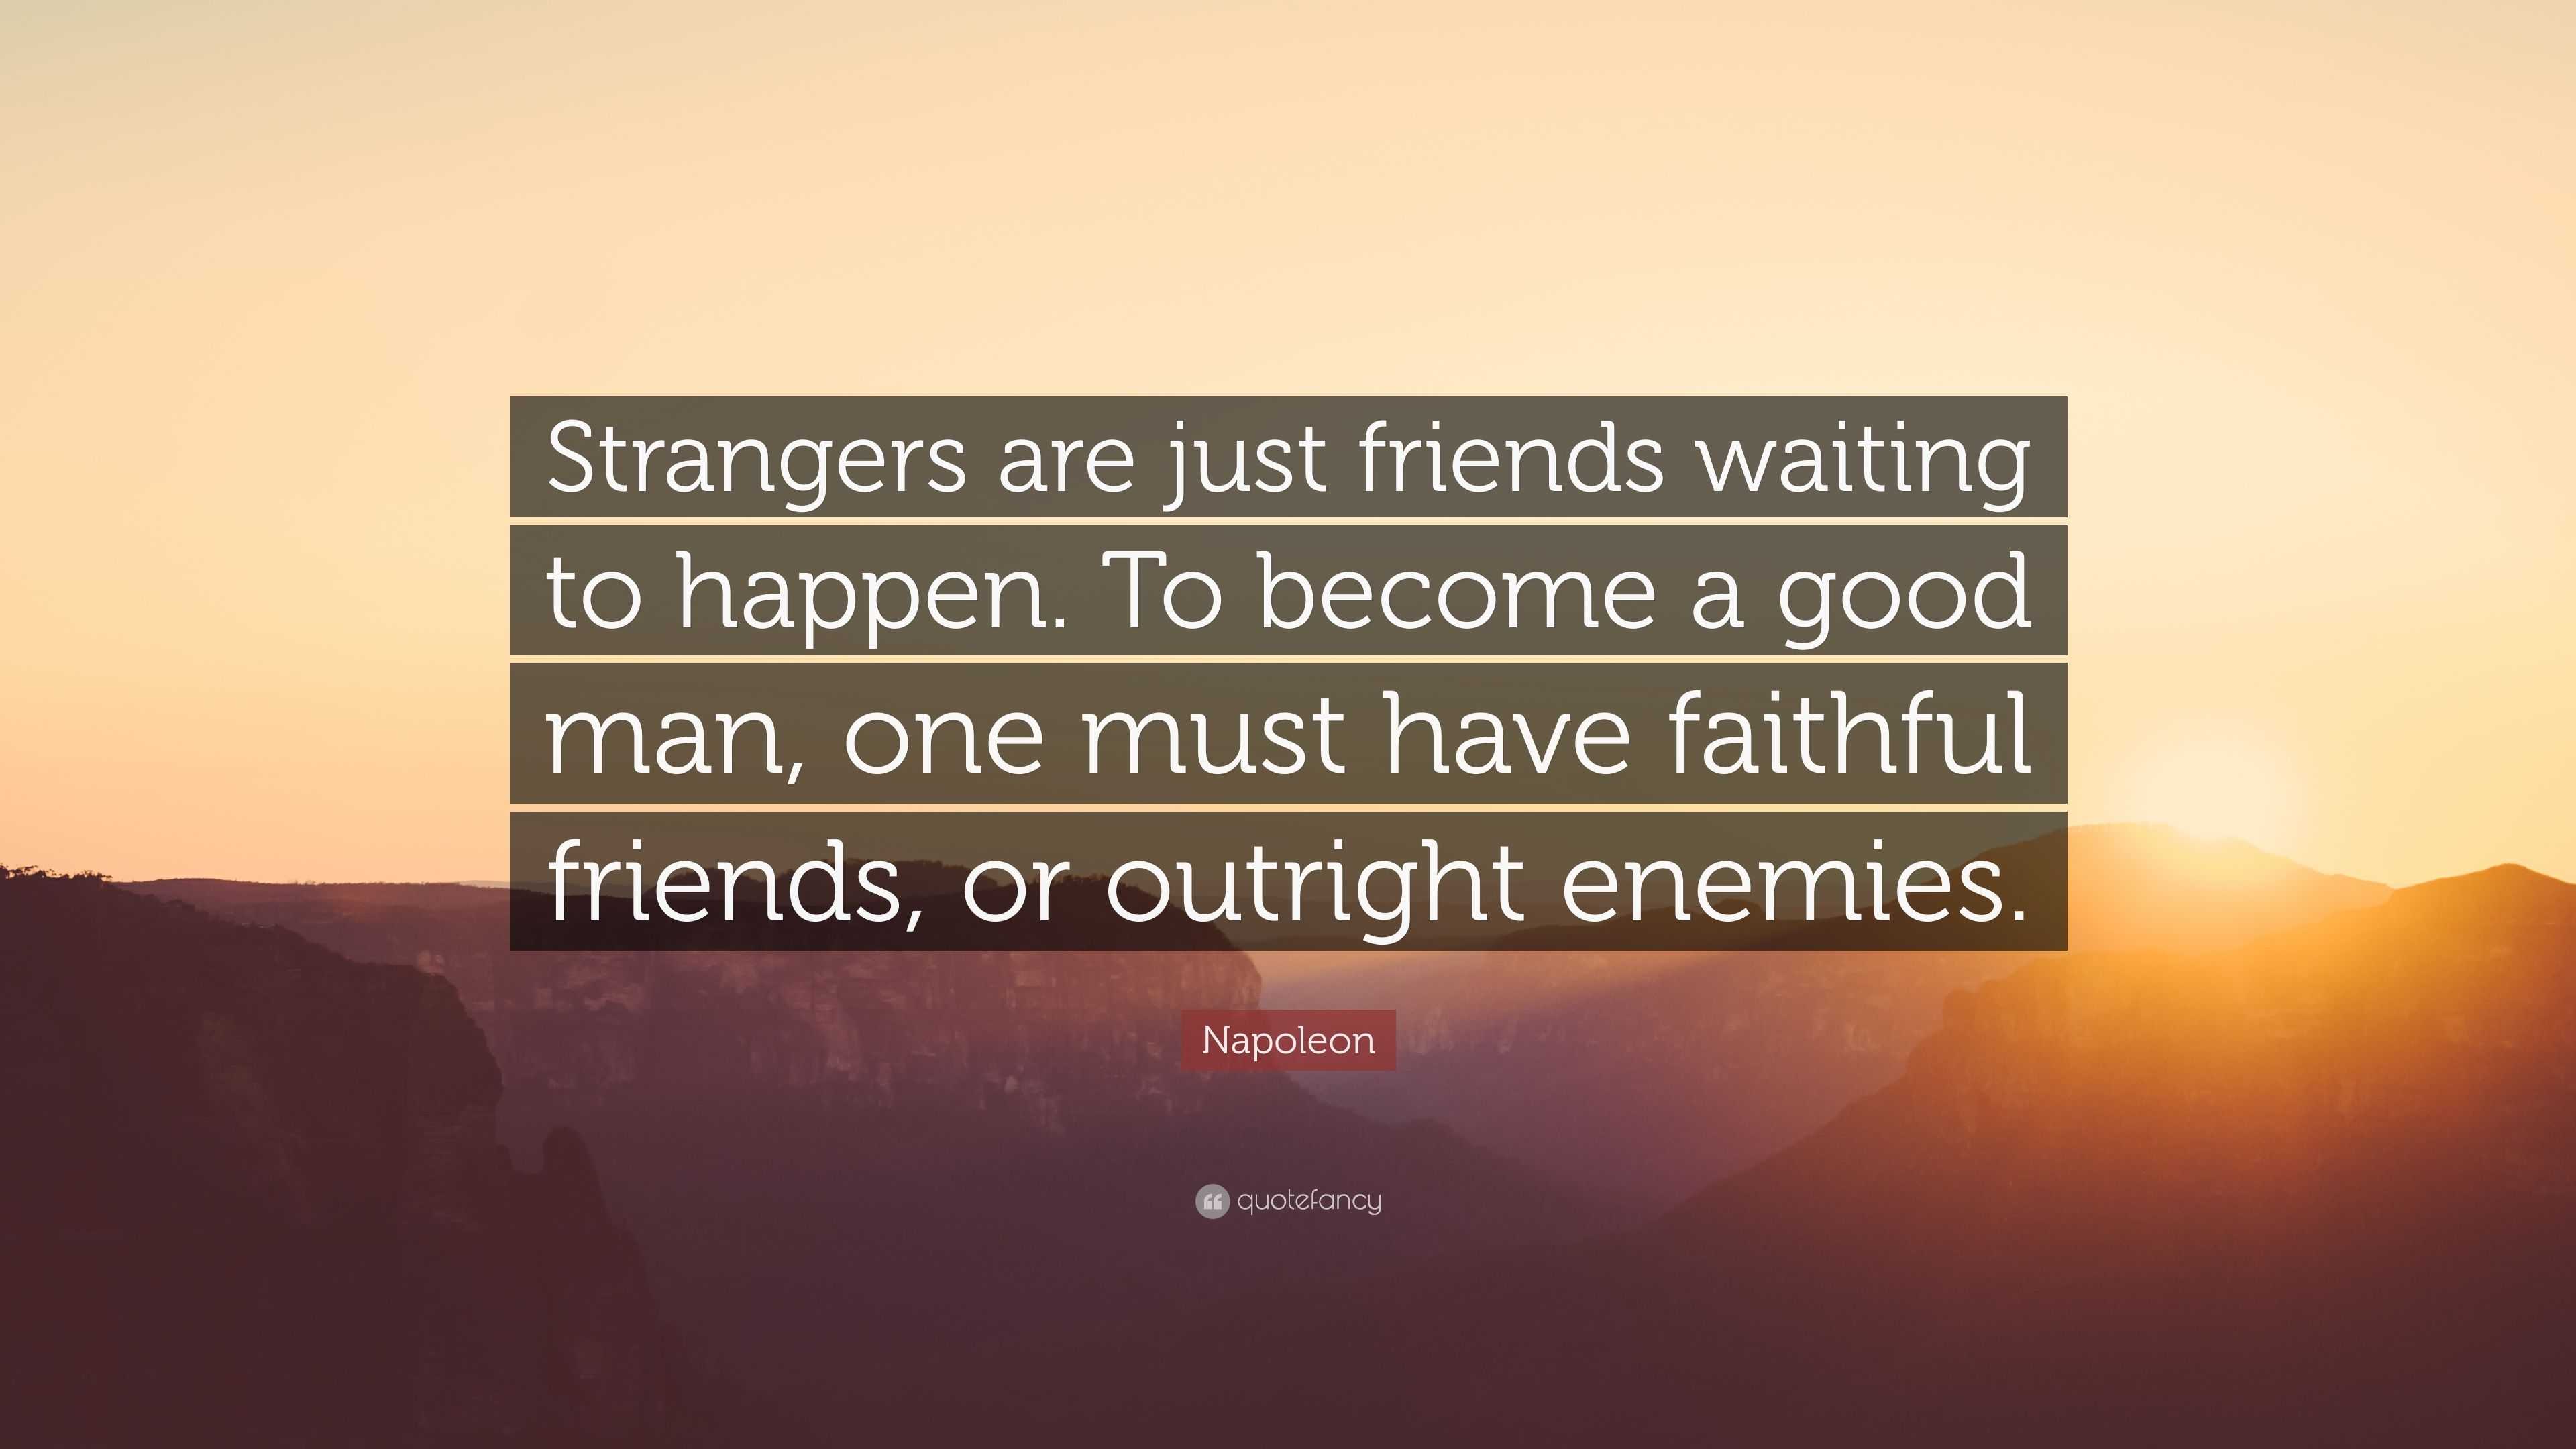 Napoleon Quote: “Strangers are just friends waiting to happen. To become a  good man, one must